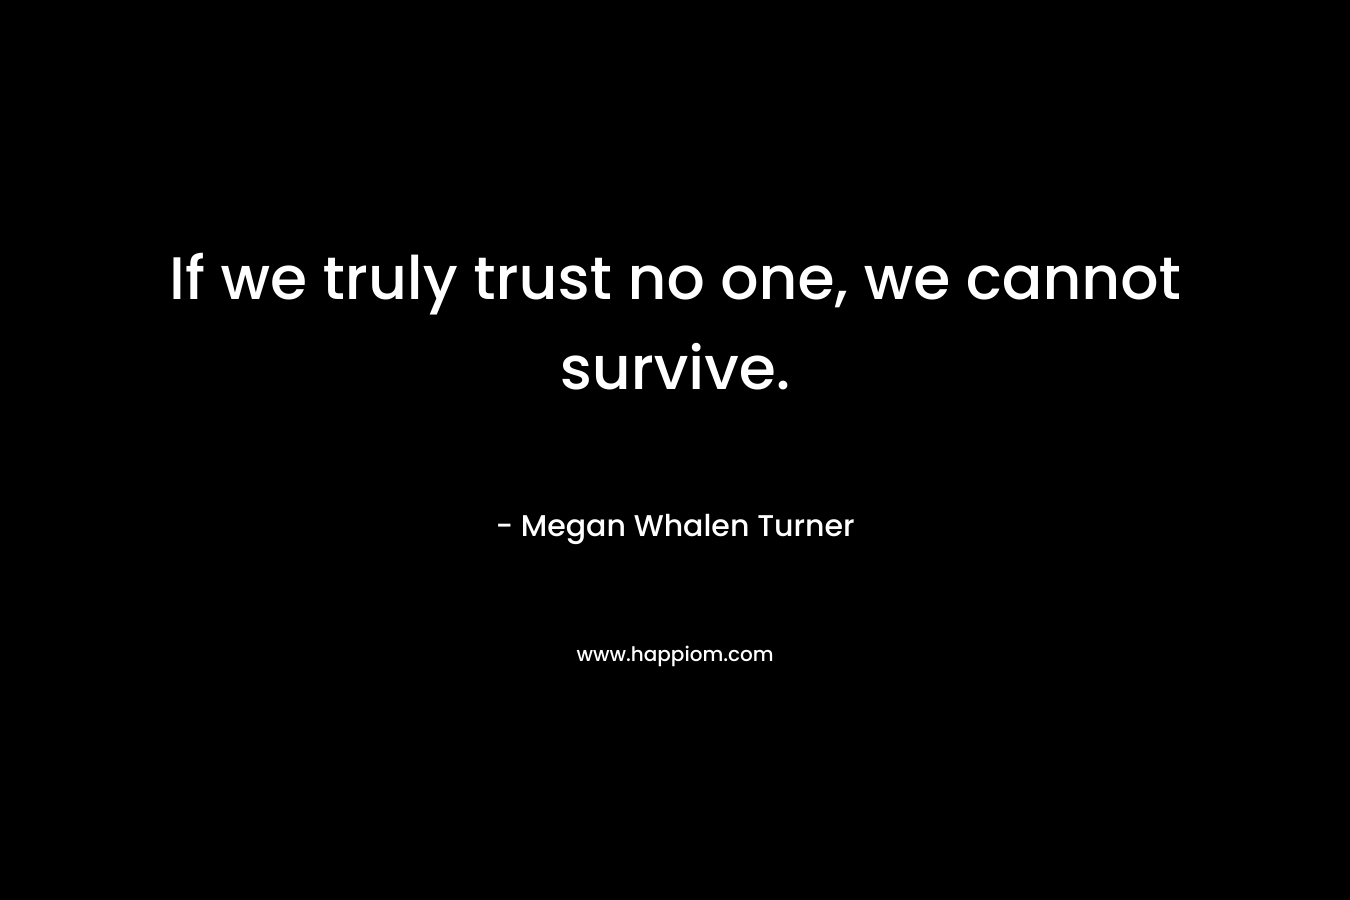 If we truly trust no one, we cannot survive.